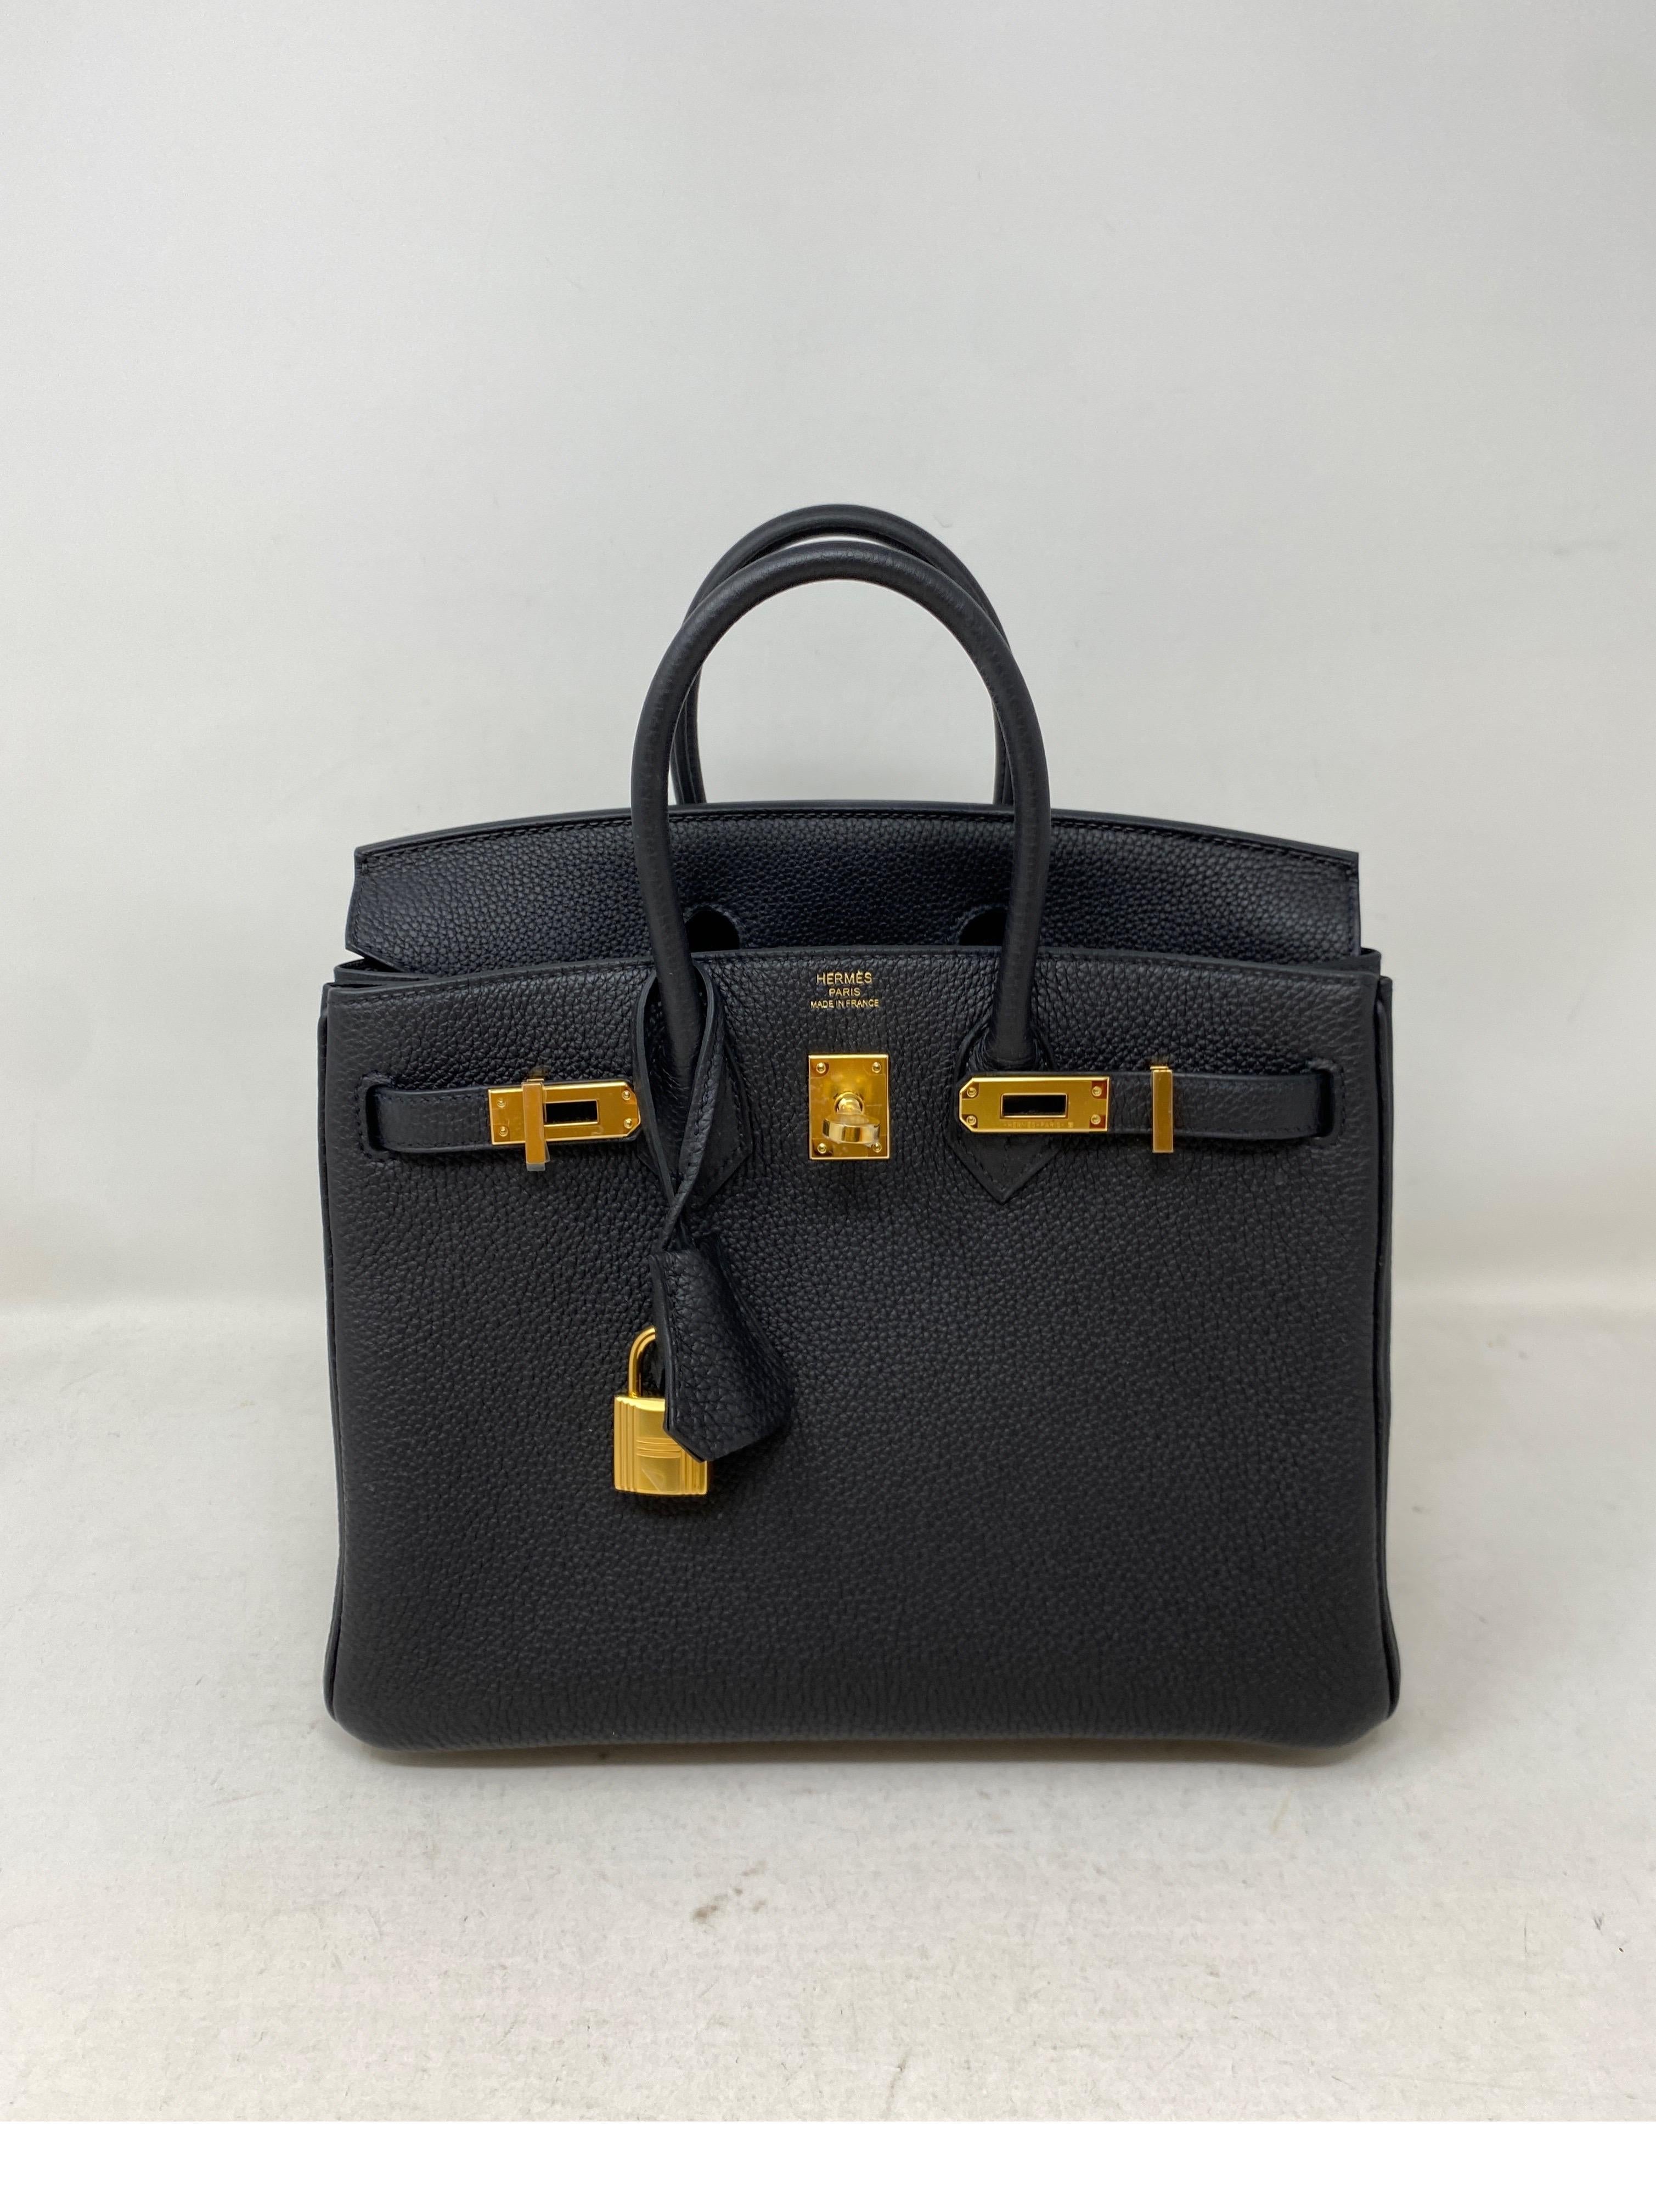 Hermes Black Birkin 25 Bag. Brand new Birkin 25. Rarest size to find. Most wanted black and gold hardware. Unicorn bag. Togo leather. Great investment bag. Includes full set. Clochette, lock, keys, dust bag, rain jacket, and box all included. Would